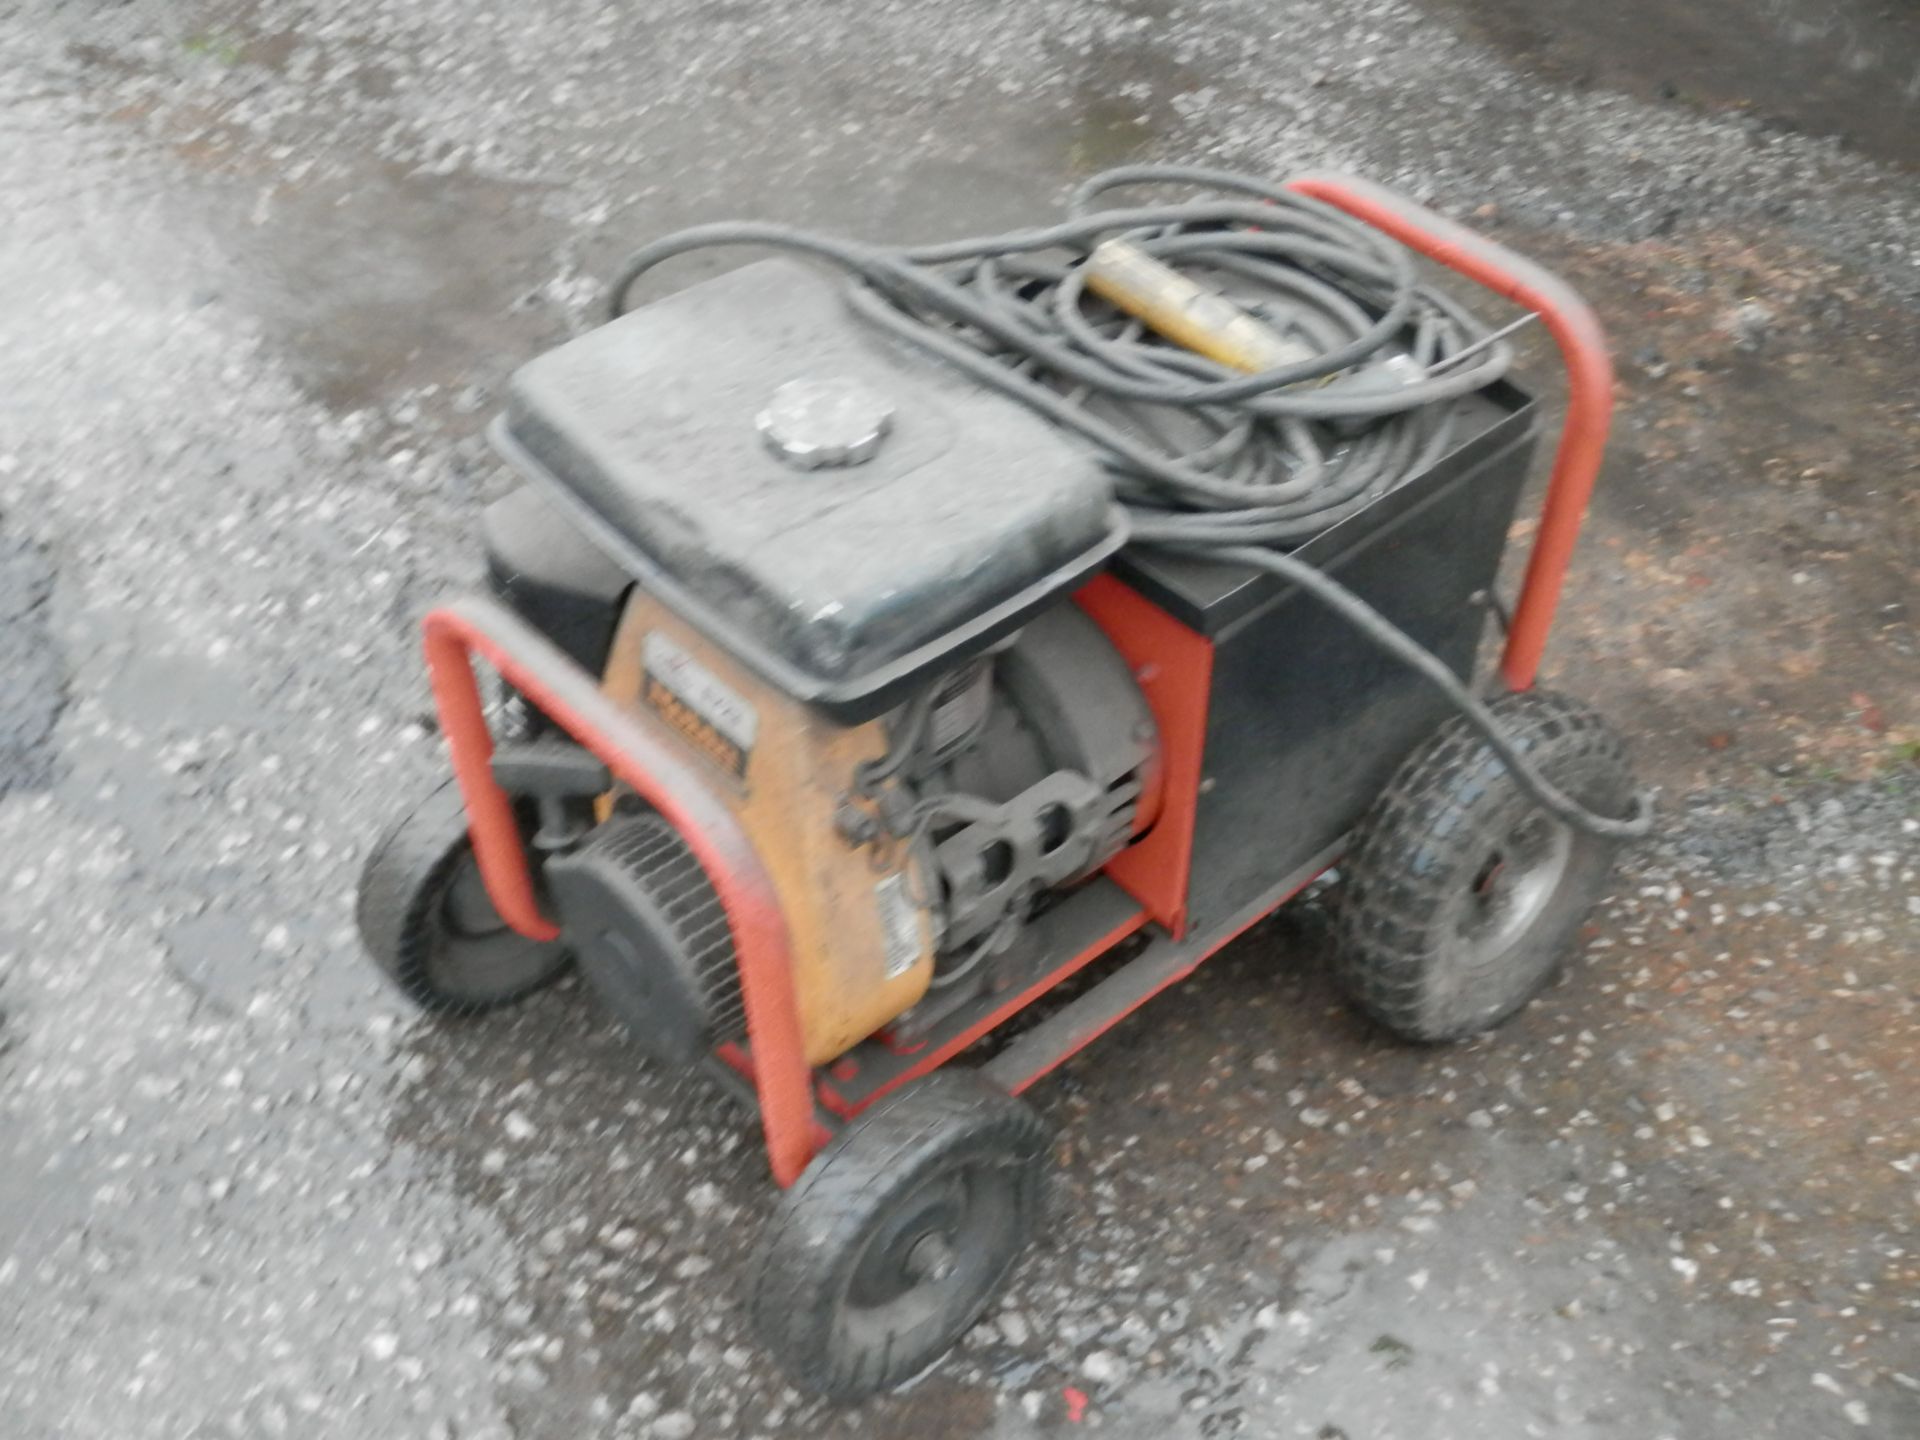 ROBIN EY23 WHEELED COMBINED WELDER & GENERATOR, WORKING. LOW RESERVE - Image 5 of 5